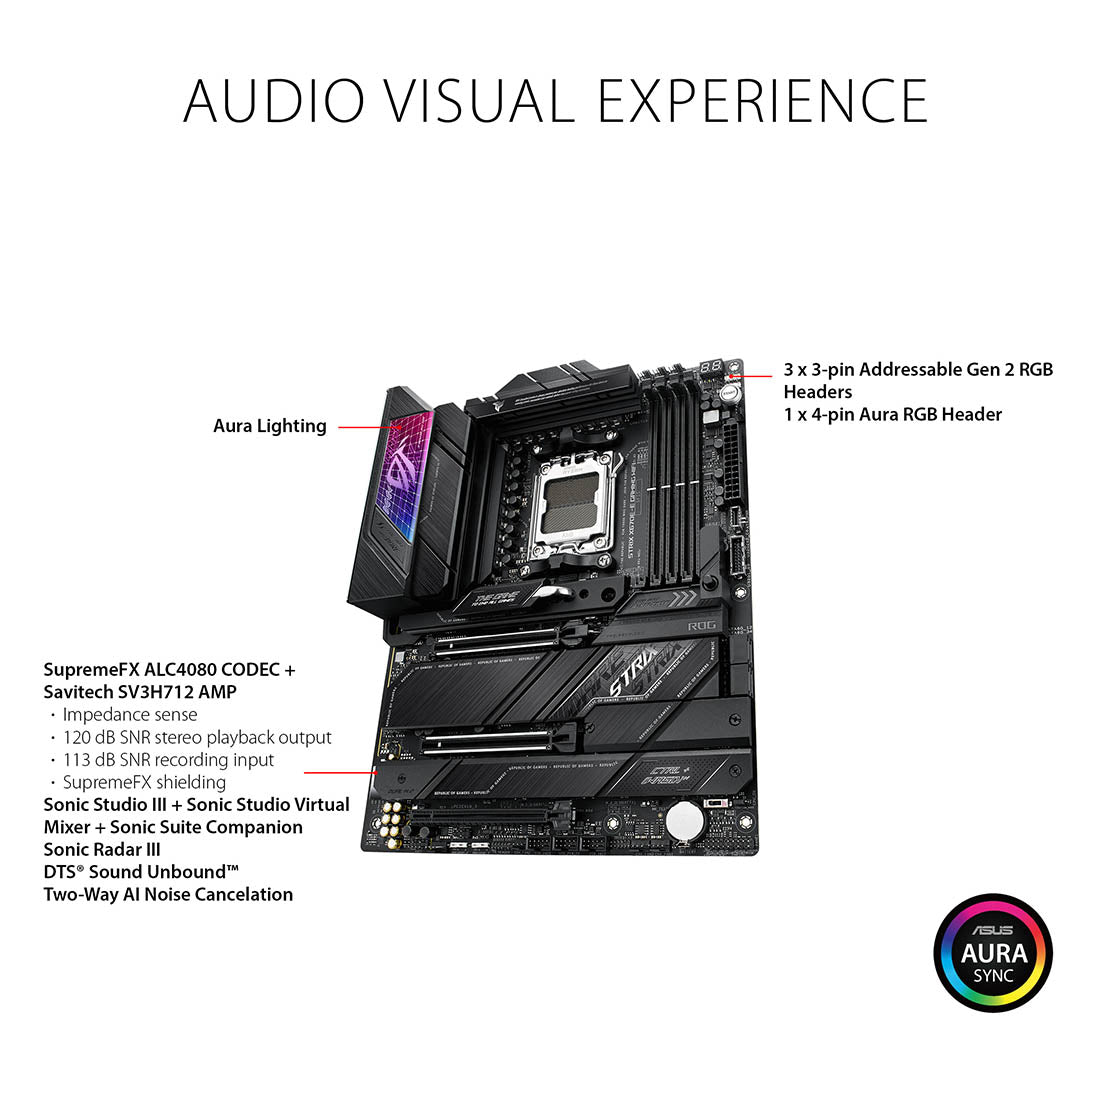 ASUS ROG STRIX X670E-E AMD AM5 ATX Gaming Motherboard with WIFI 6E and PCIe 5.0